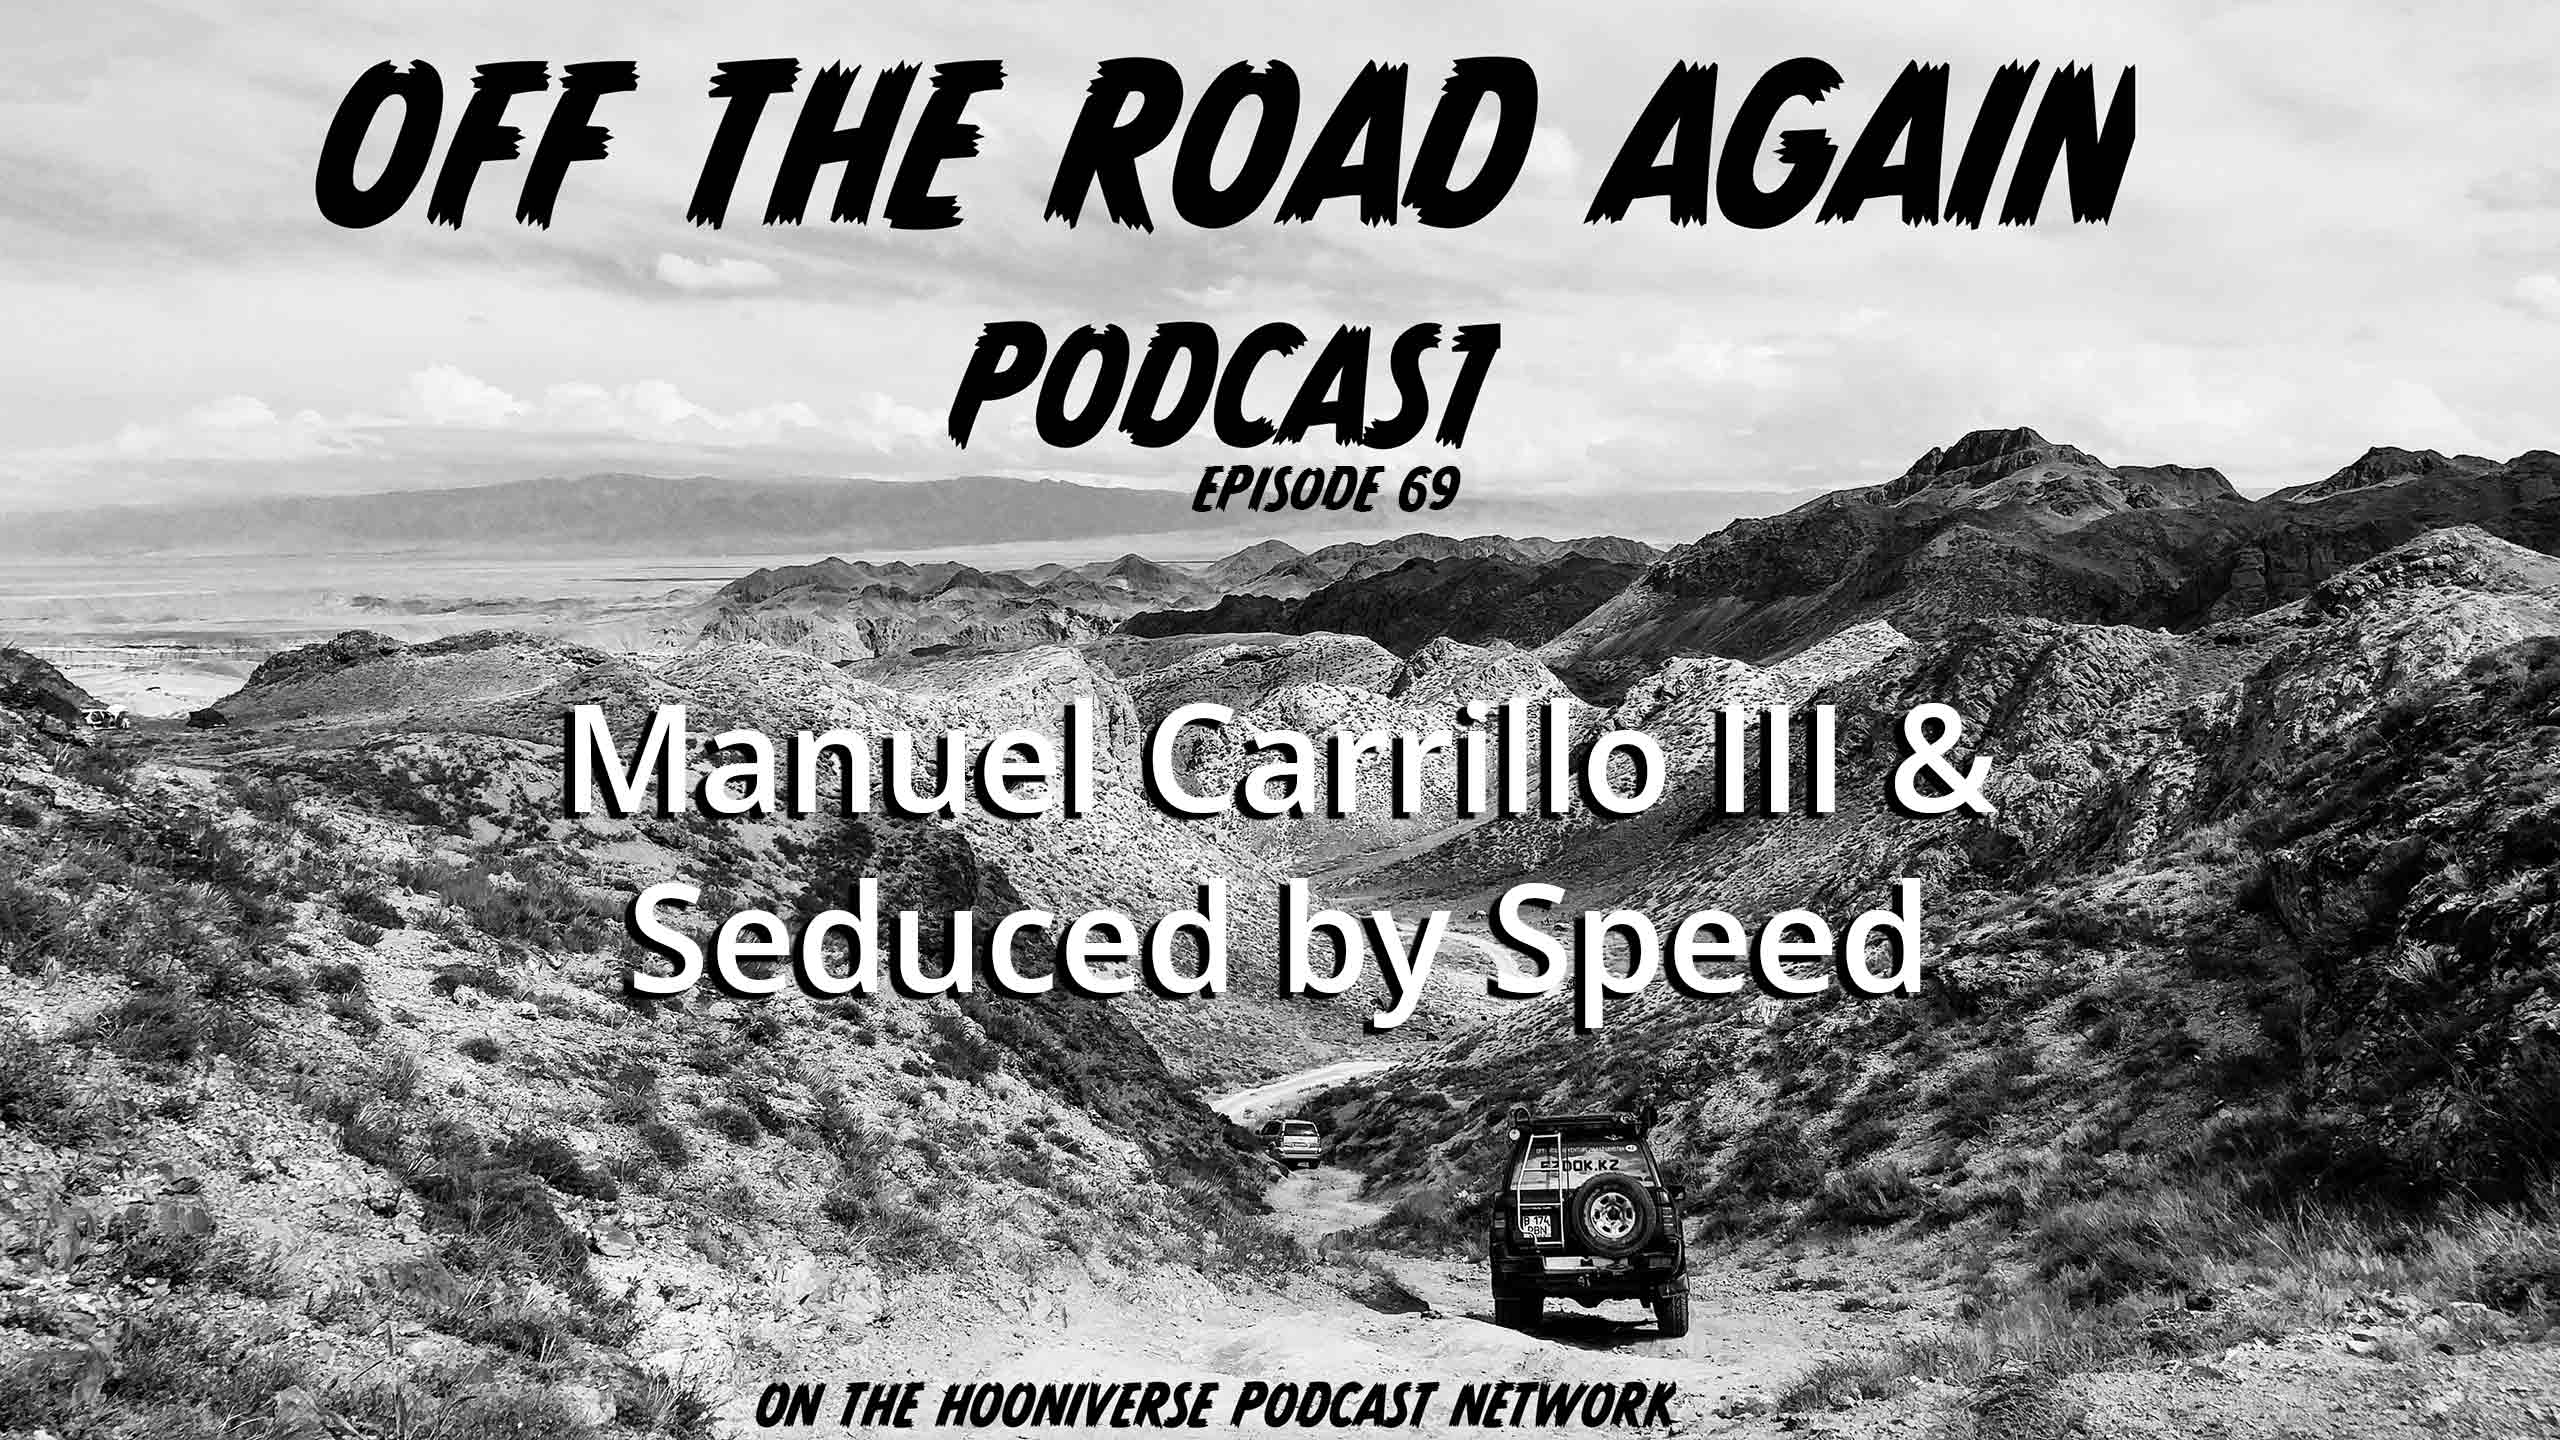 Manuel-Carrillo-III-Seduced-by-Speed-Off-The-Road-Again-Podcast-Episode-69